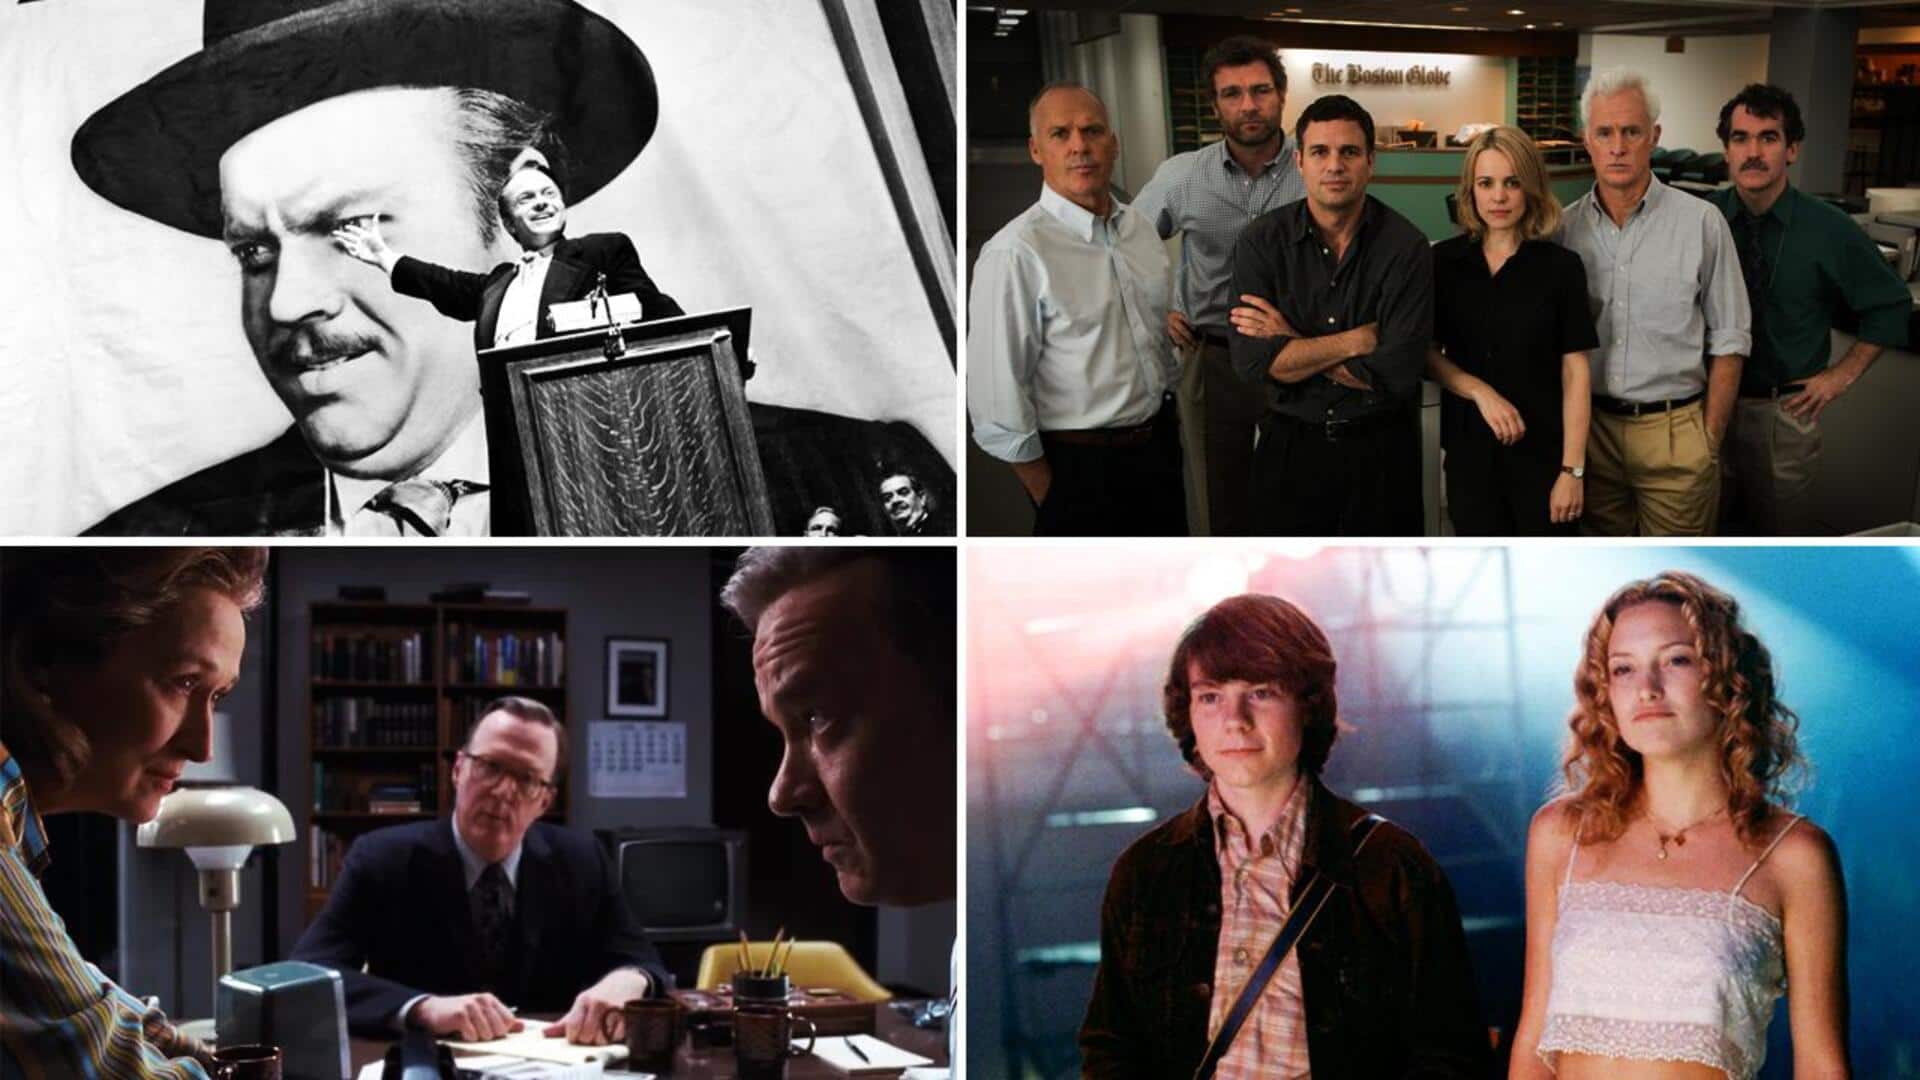 'Citizen Kane' to 'The Post': Best Hollywood movies on journalism